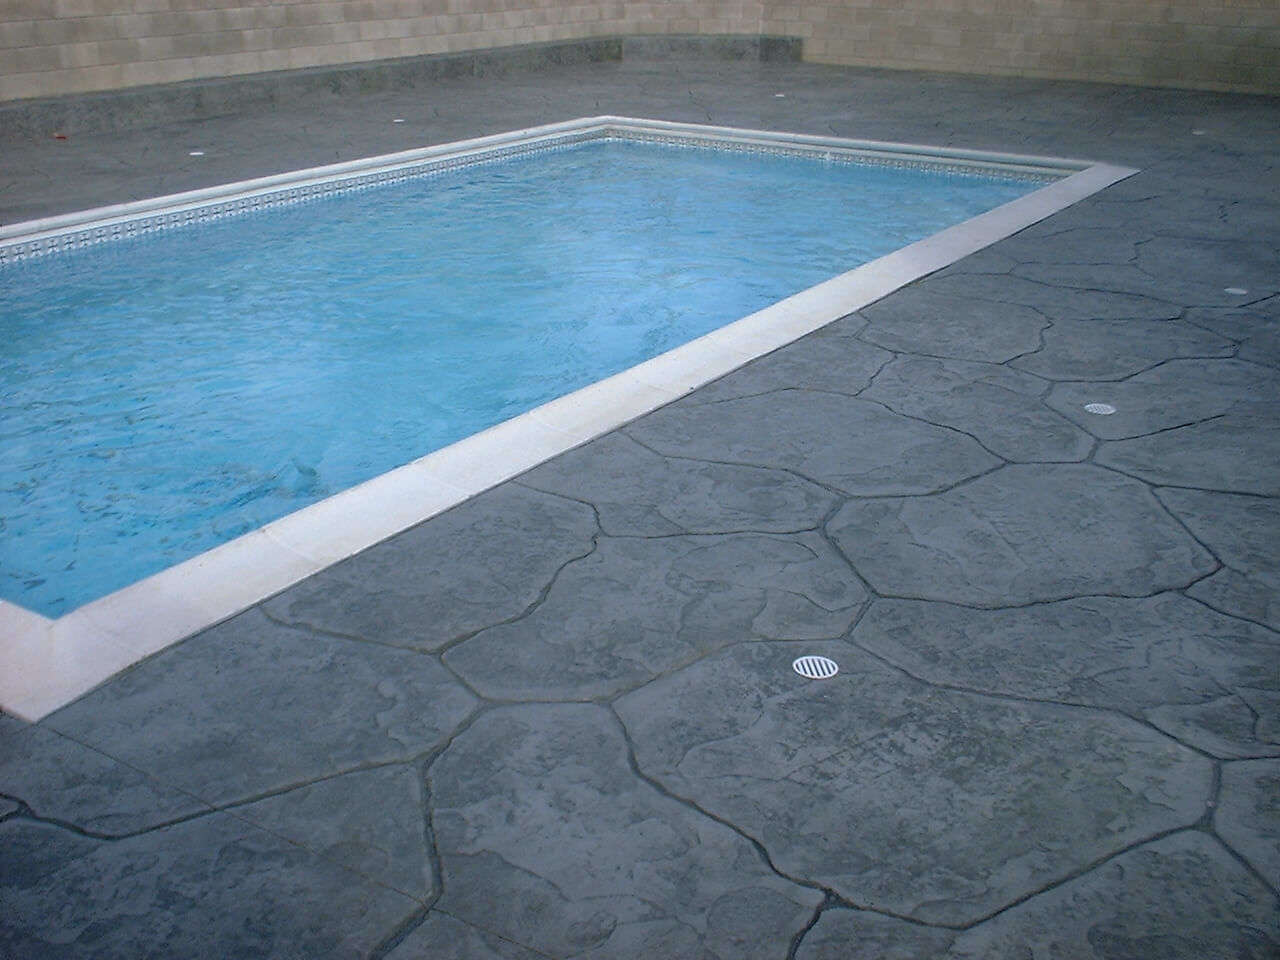 A Stamp Concrete Area WIth Drain Plugs by a Pool Area